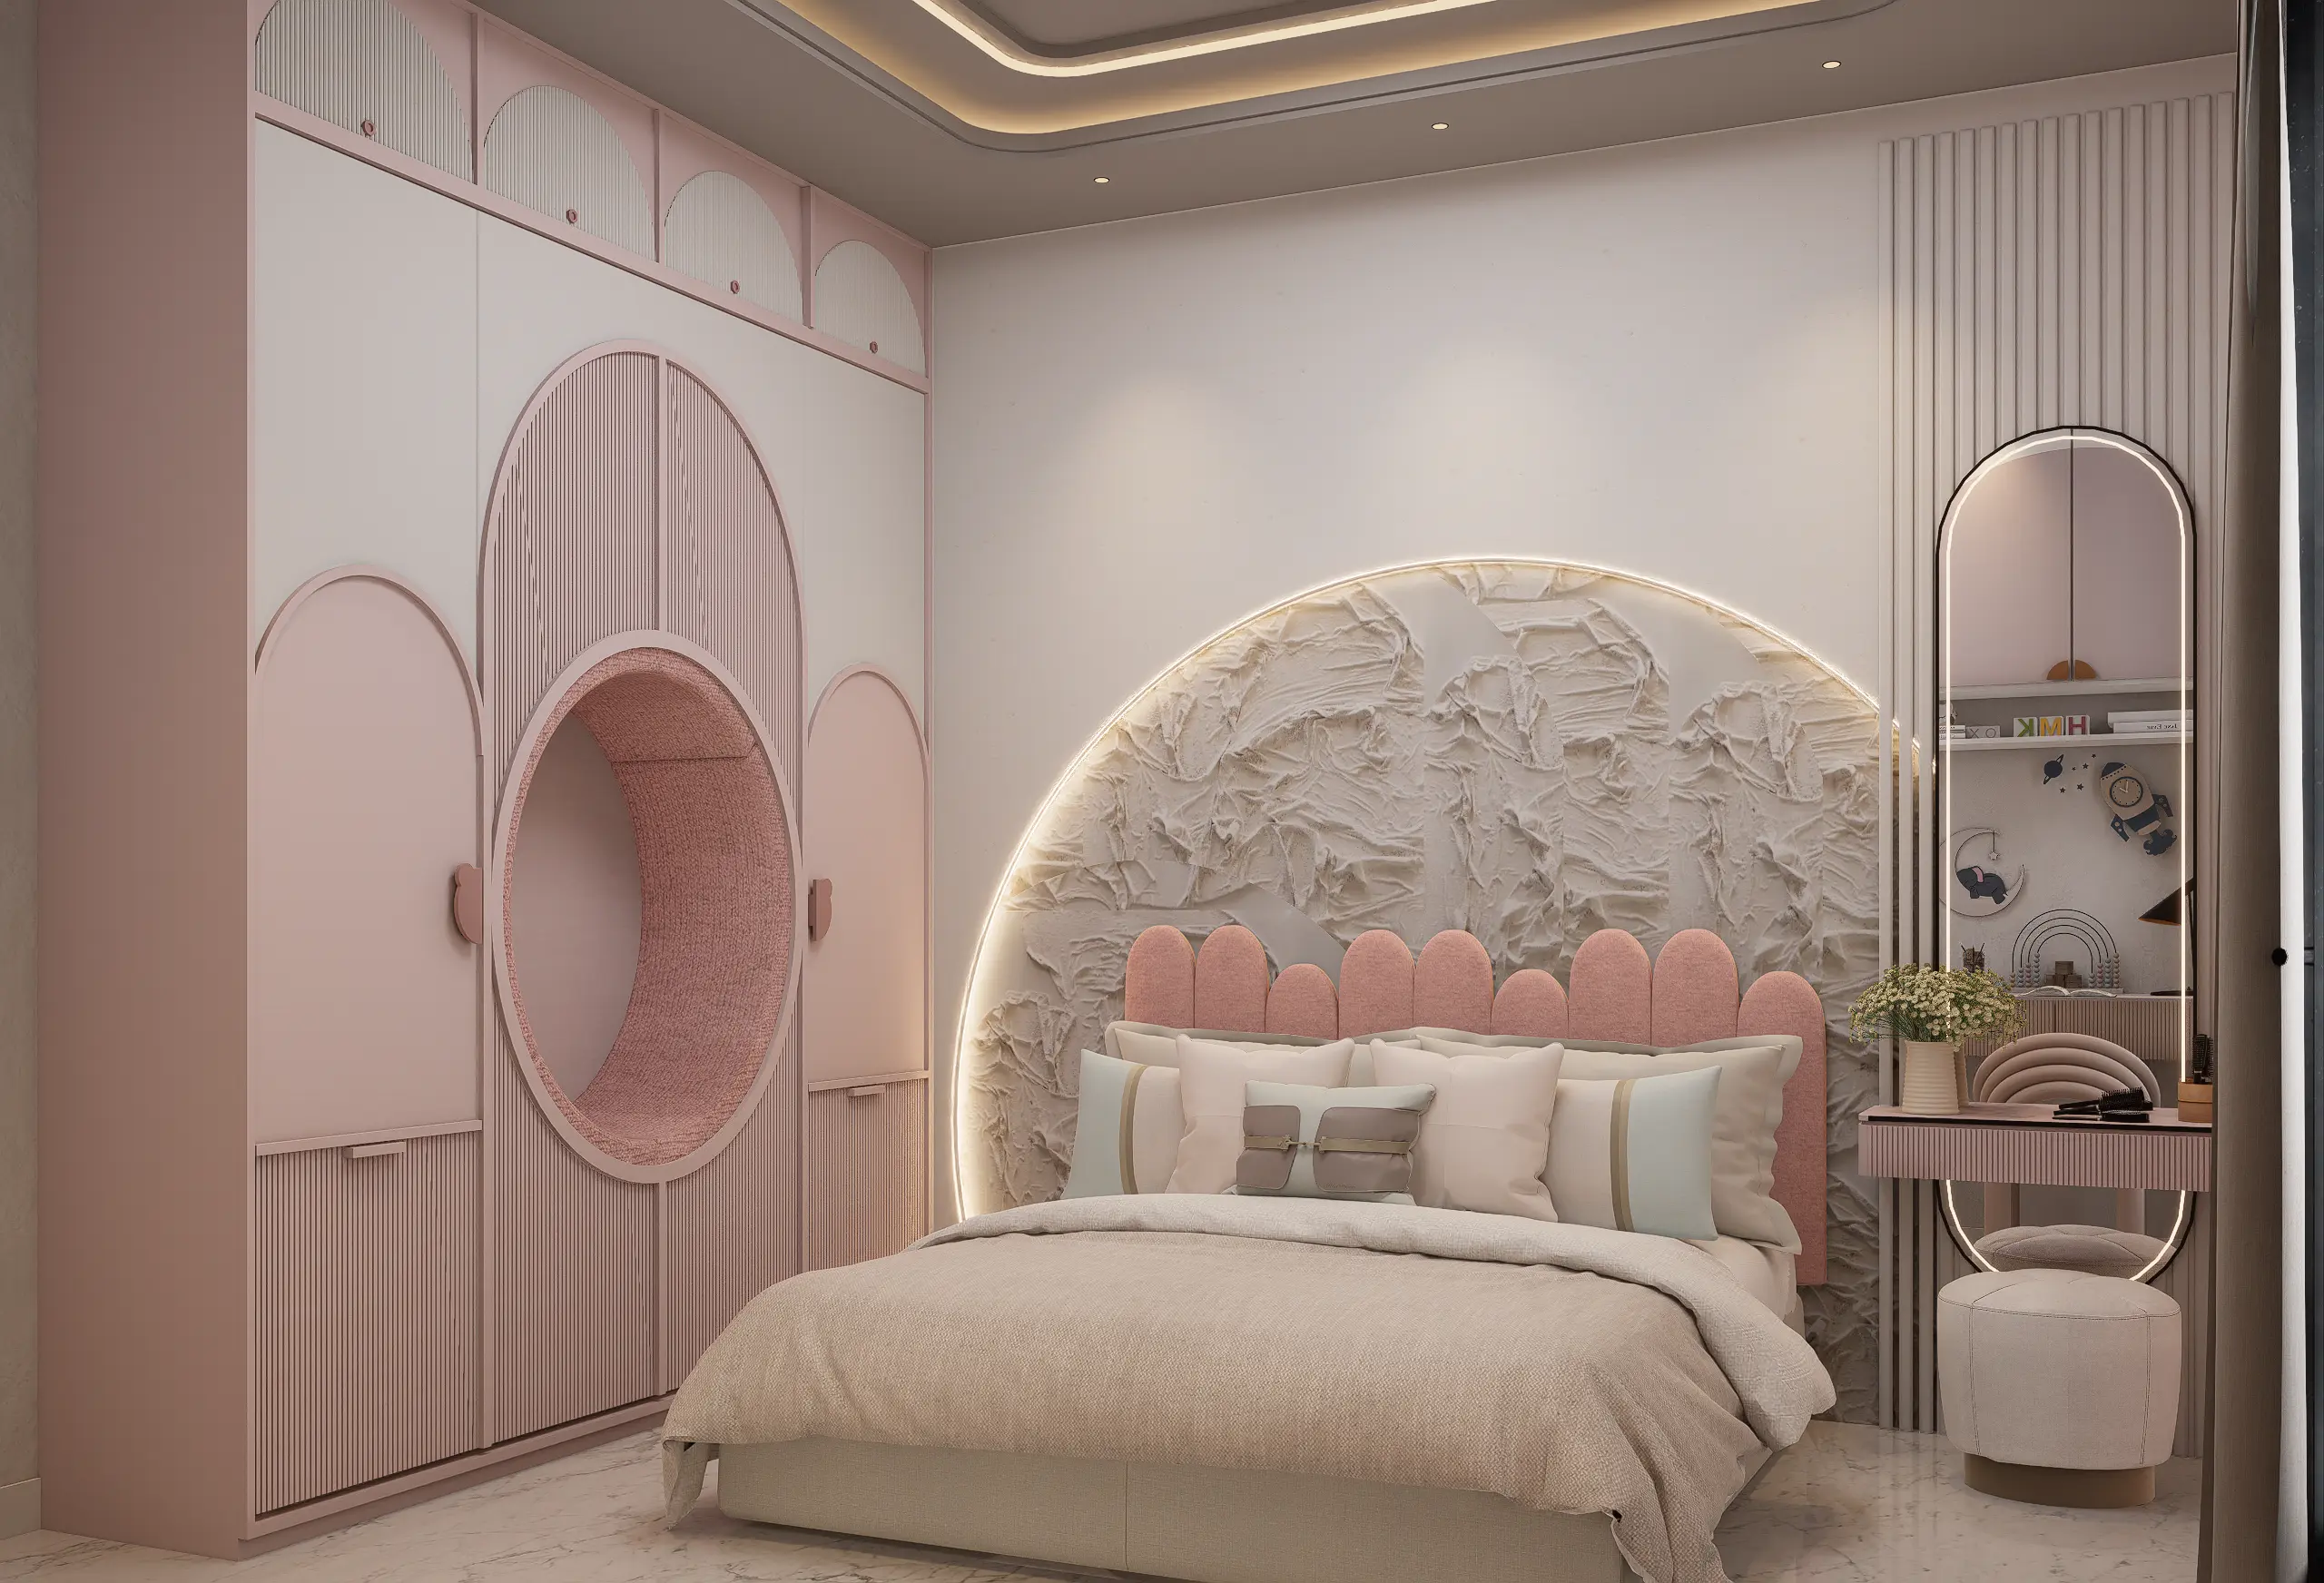 3D Rendering - Property investment with TavasteHive's bedroom render